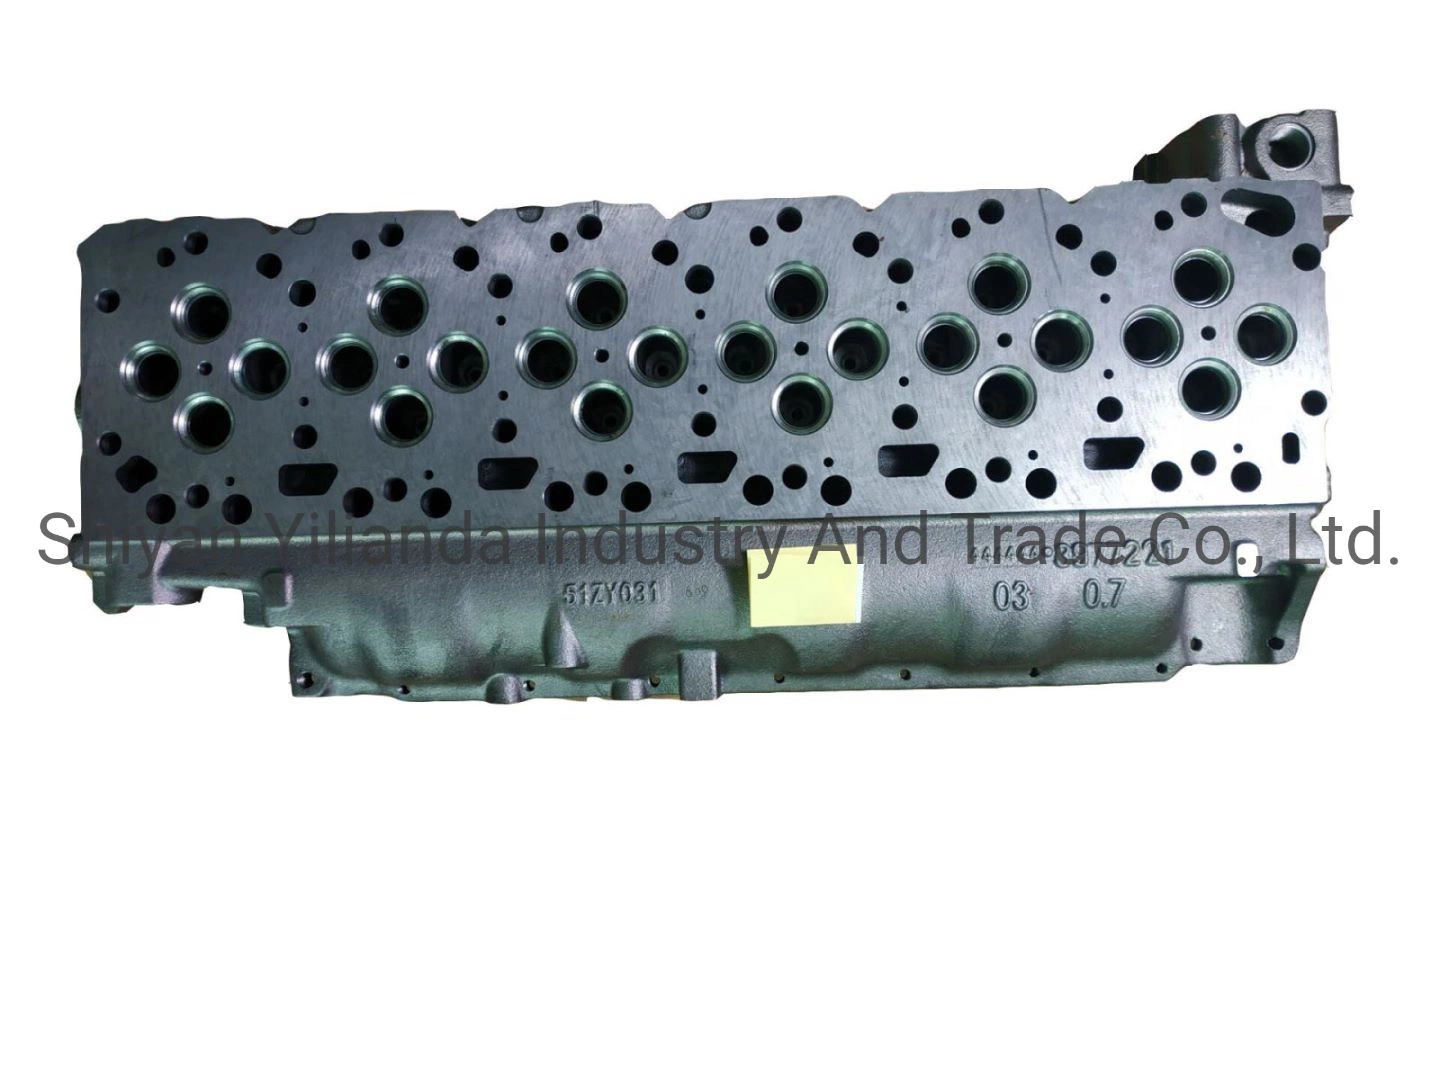 Qsb6.7 6D107 Isde6.7 Isbe5.9 Cylinder Head Assembly 3977221 3977225 2831474 4936081 Truck Machinery Parts